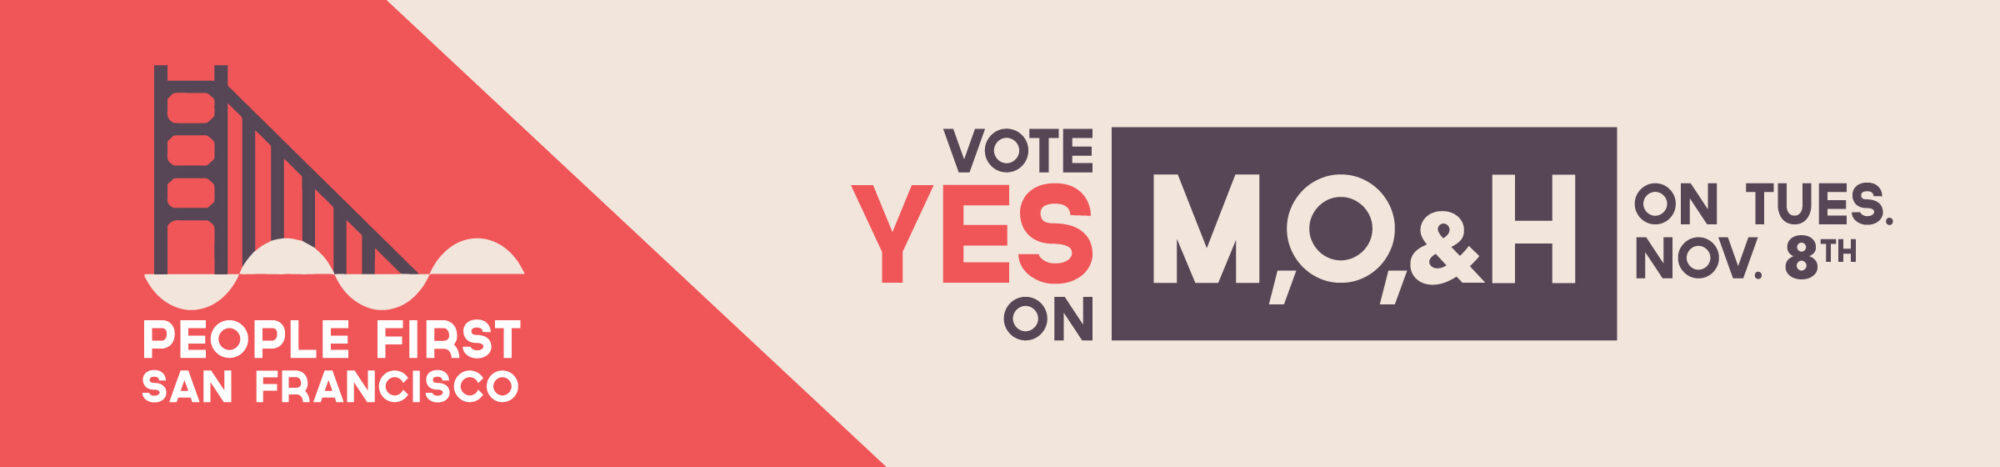 DSA SF People First San Francisco Header Image - Yes on M, O, and H